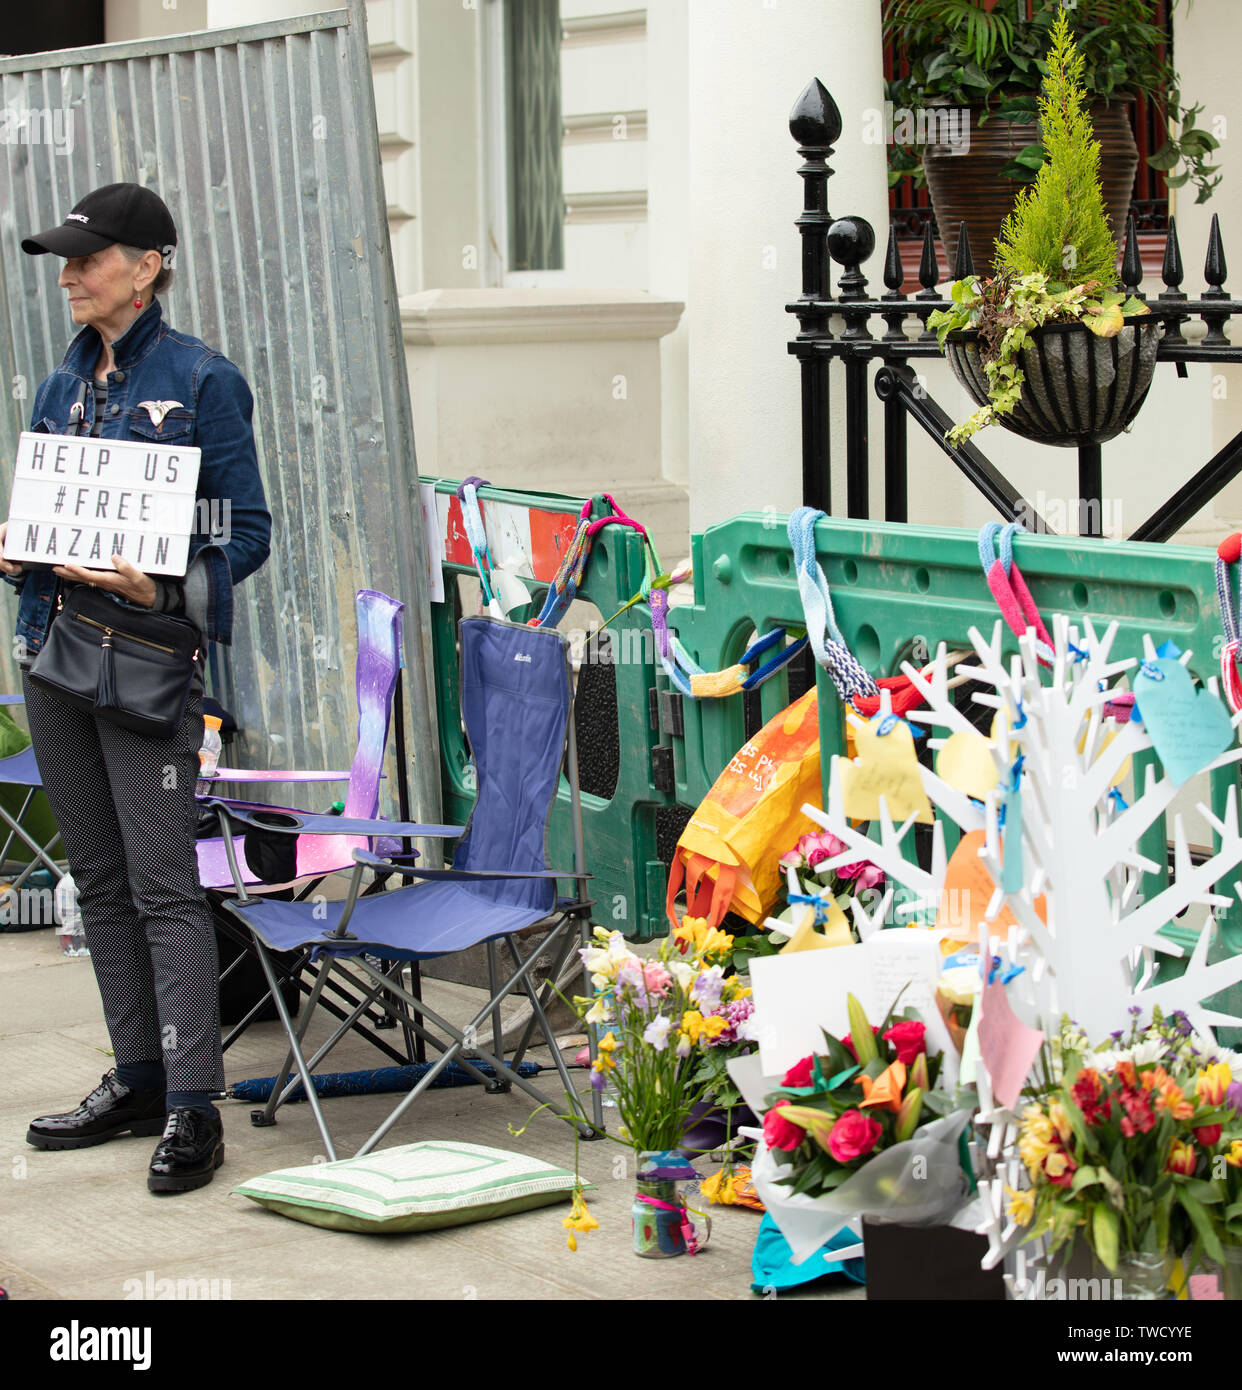 London, UK. 19th June 2019. Hunger strike: Supporter of Richard Ratcliffe who is on hunger strike in front of the Iranian embassy in London in protest of the detention of his wife Nazanin Zaghari in Iran over spying allegations. Credit: Joe Kuis / Alamy Stock Photo